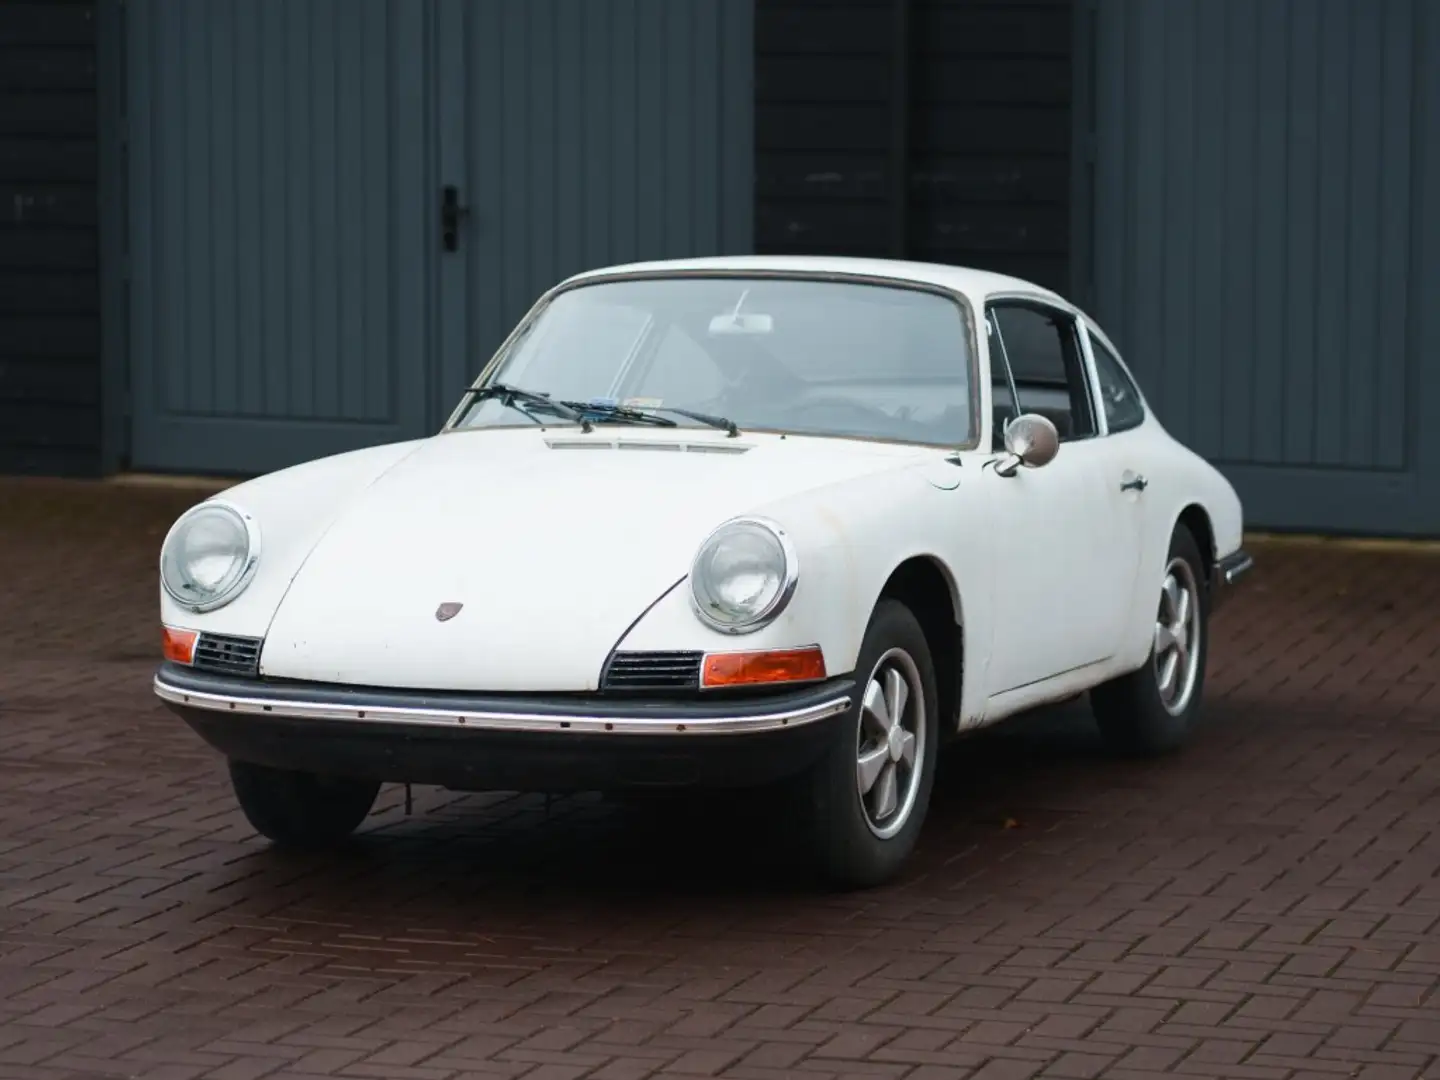 Porsche 912 Coupe late 1965 early 66 model Blanc - 1